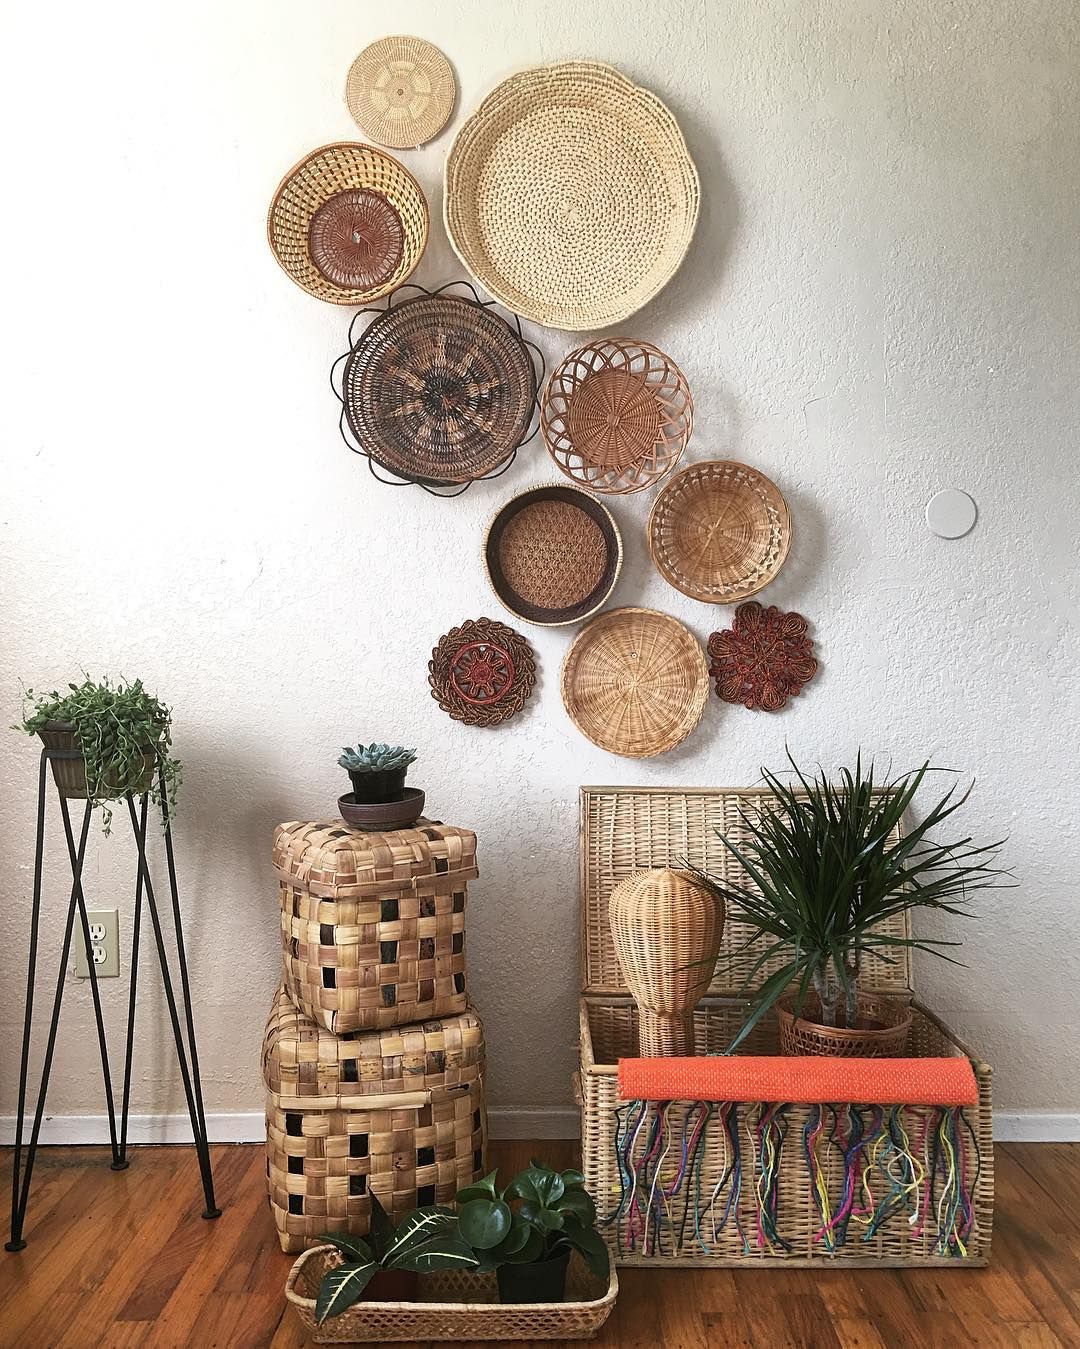 Redecorate With What You Have - baskets